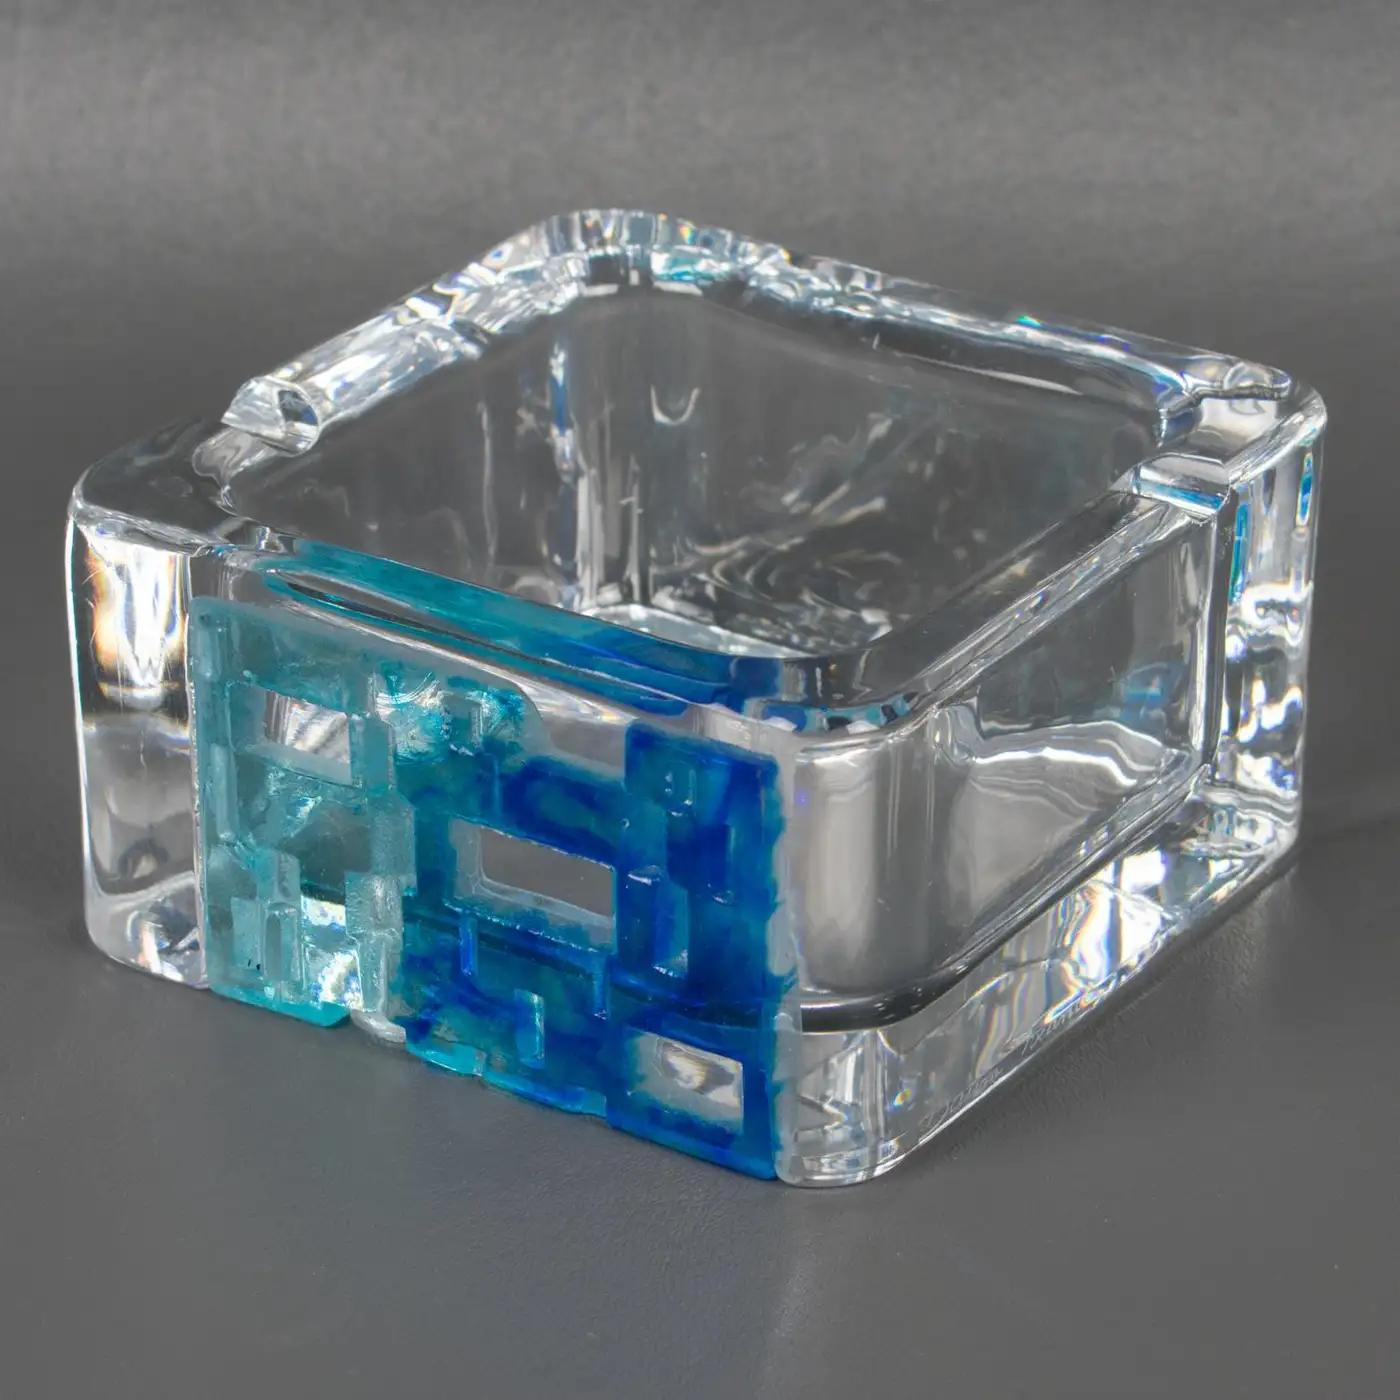 Mid-Century Modern Daum Crystal and Blue Pate de Verre Ashtray Desk Tidy Bowl Catchall For Sale